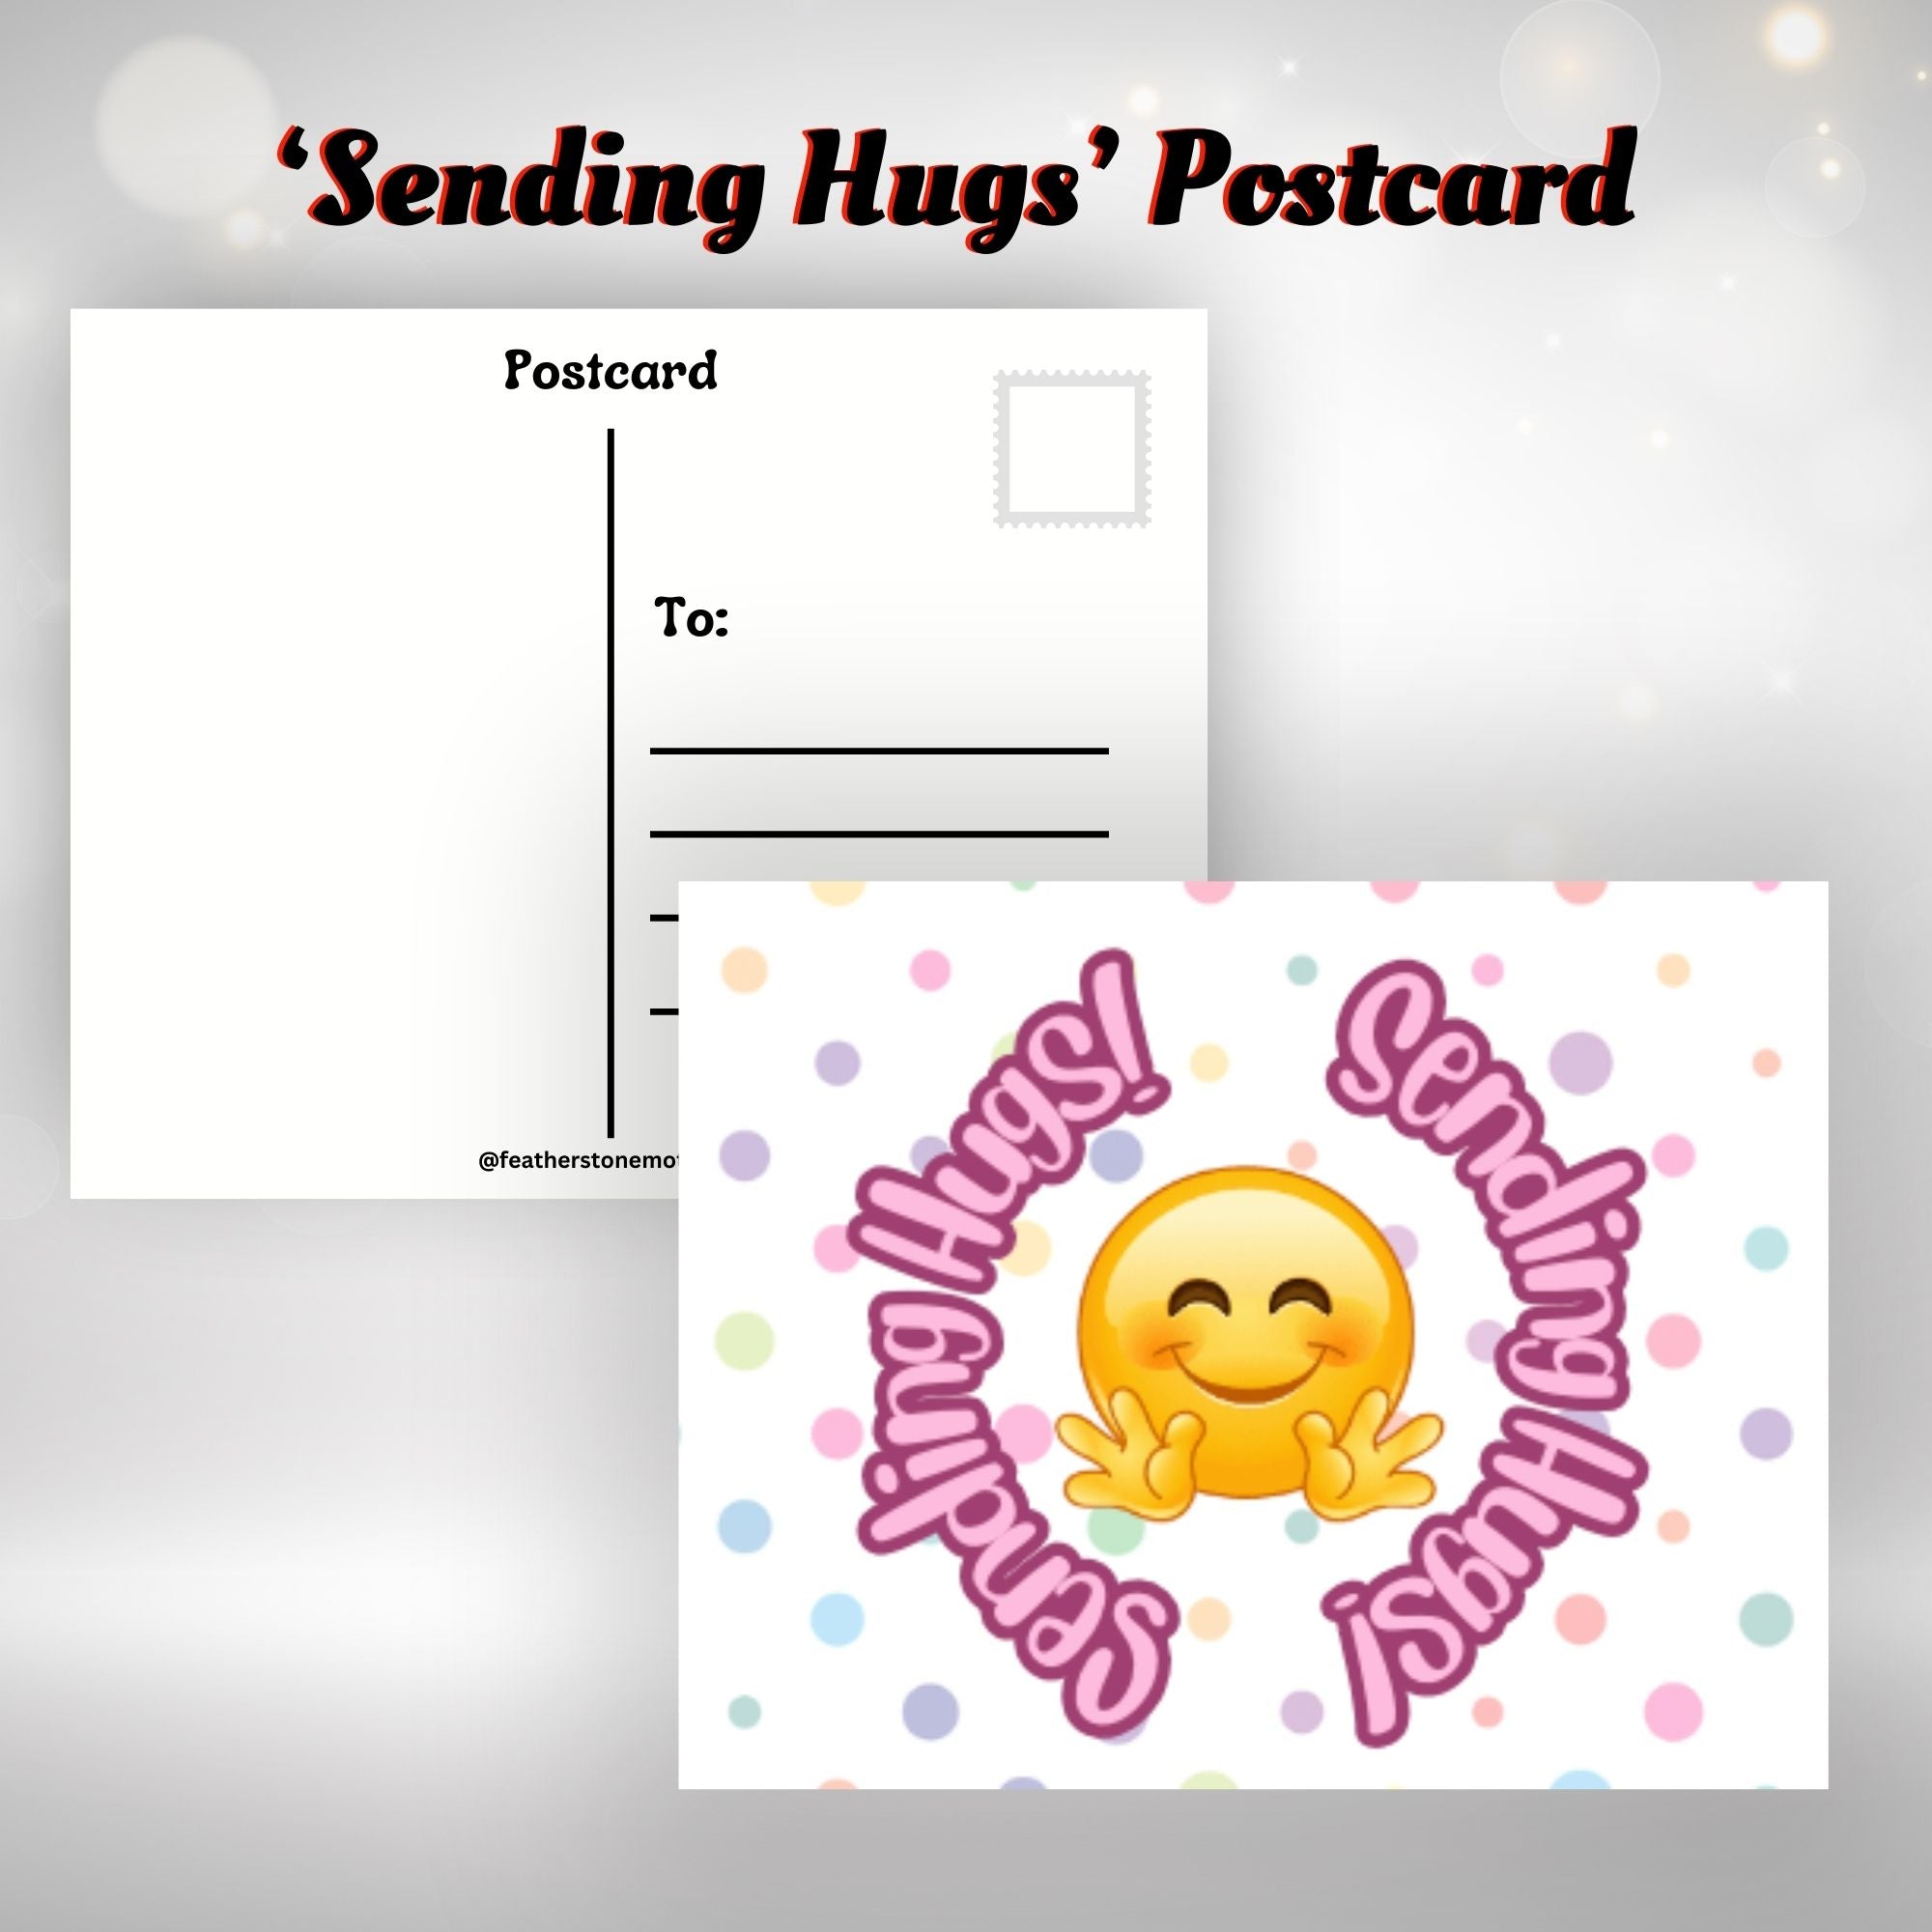 This image shows the Sending Hugs! postcard with a smiley face reaching out for a hug.